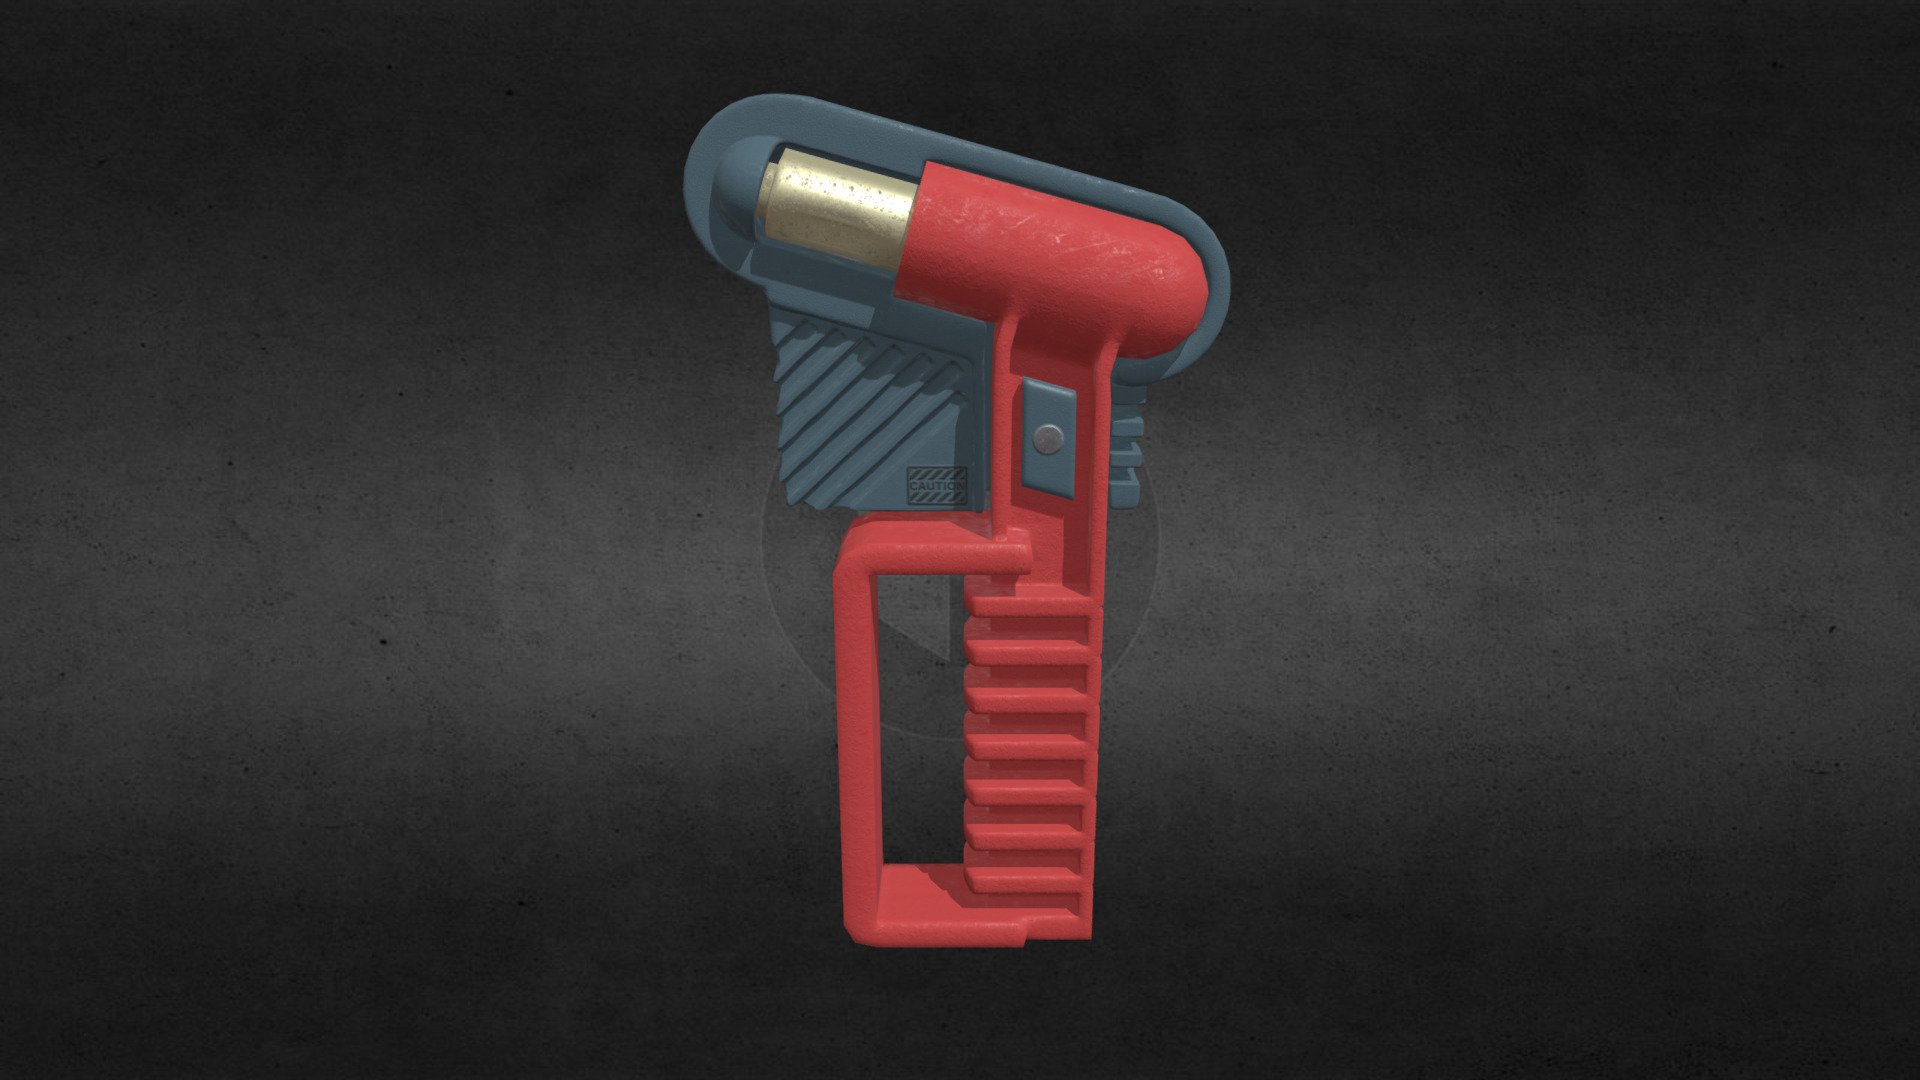 A model of an emergency hammer.
The entire mesh is modeled from quads 3d model